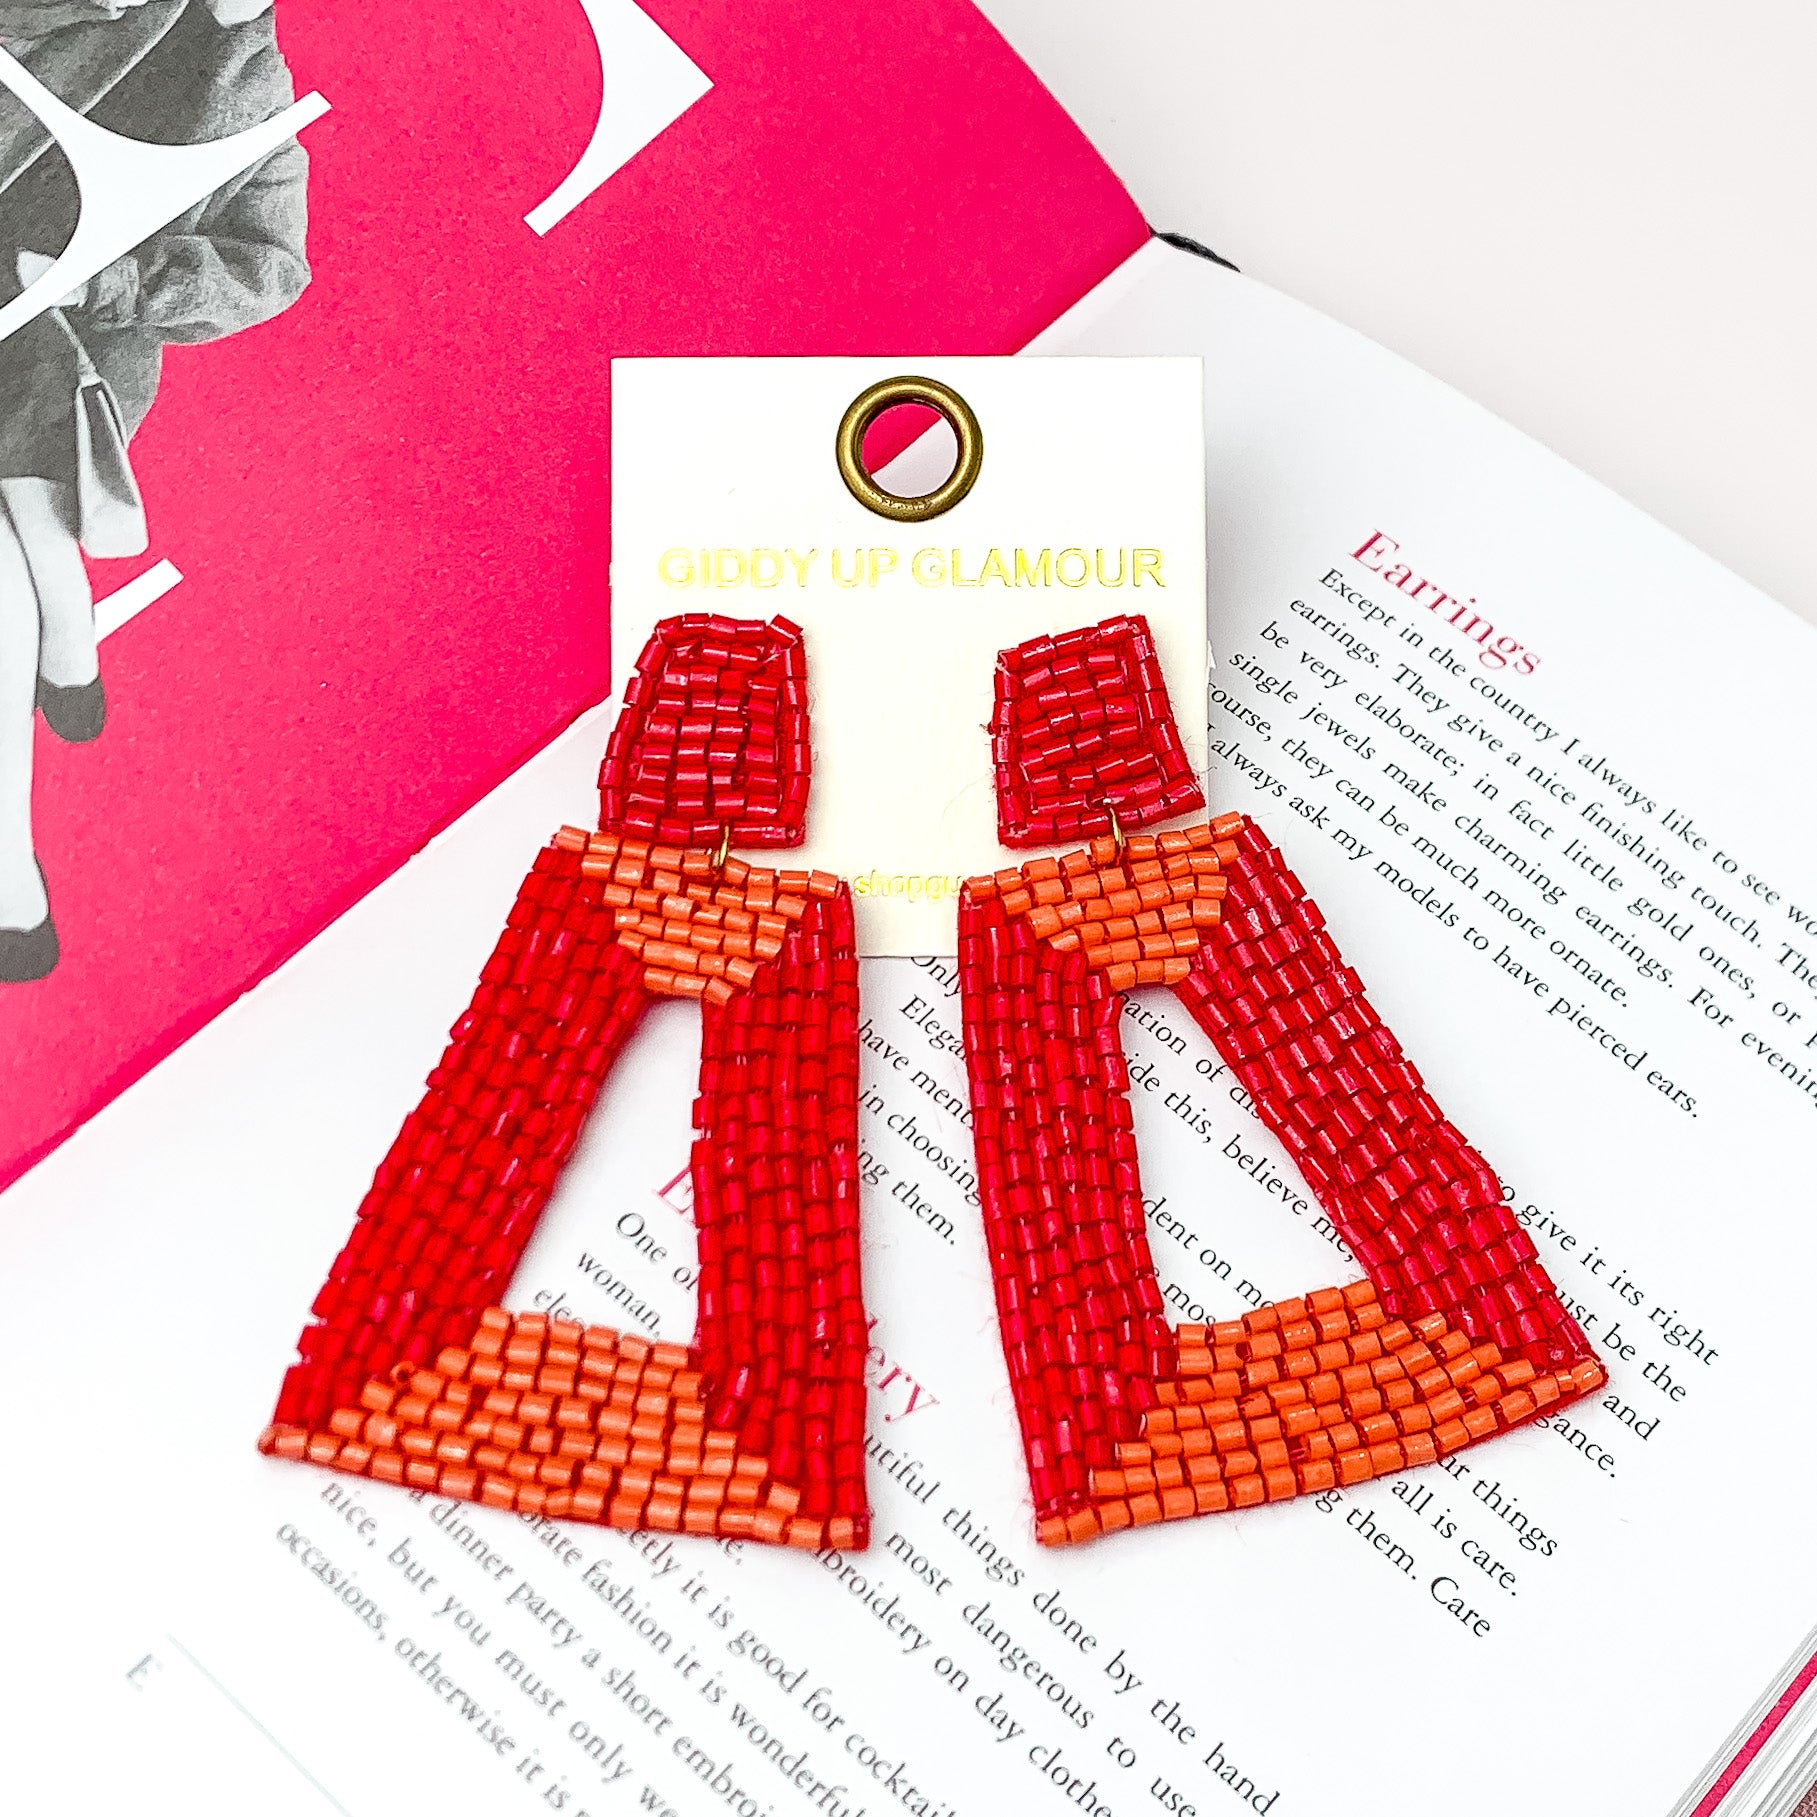 Beaded Rectangle Designed Earrings in Red, and Orange. Pictured on a white background with an open book behind the earrings. 